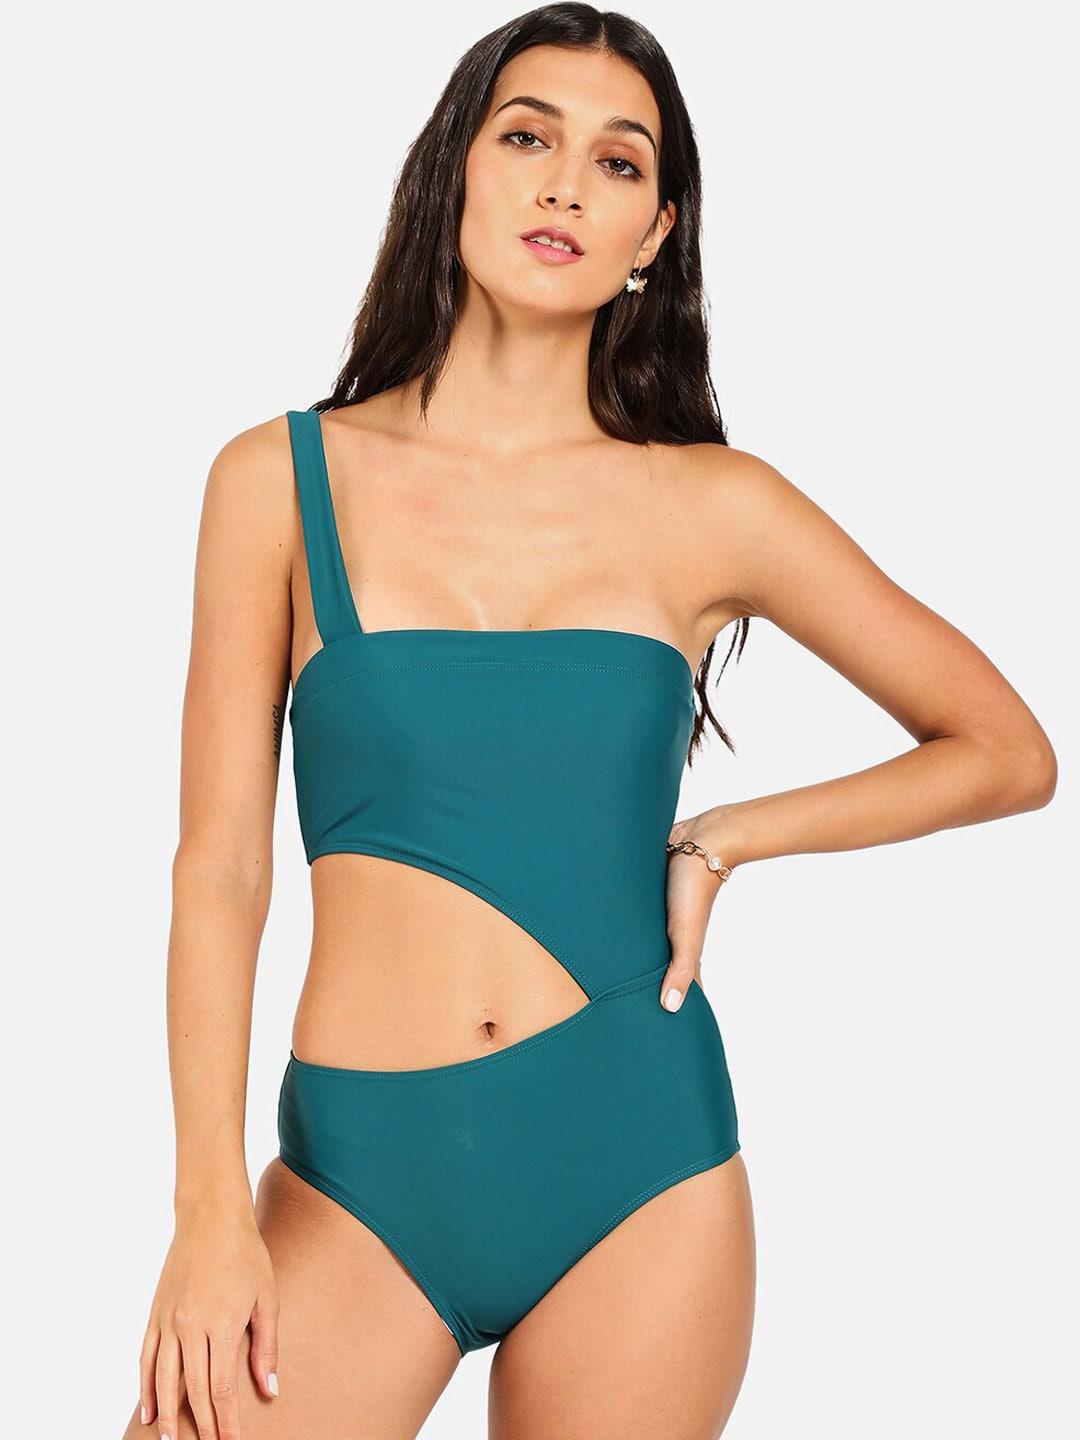 haute-sauce-by--campus-sutra-women-cut-out-one-piece-swimsuit